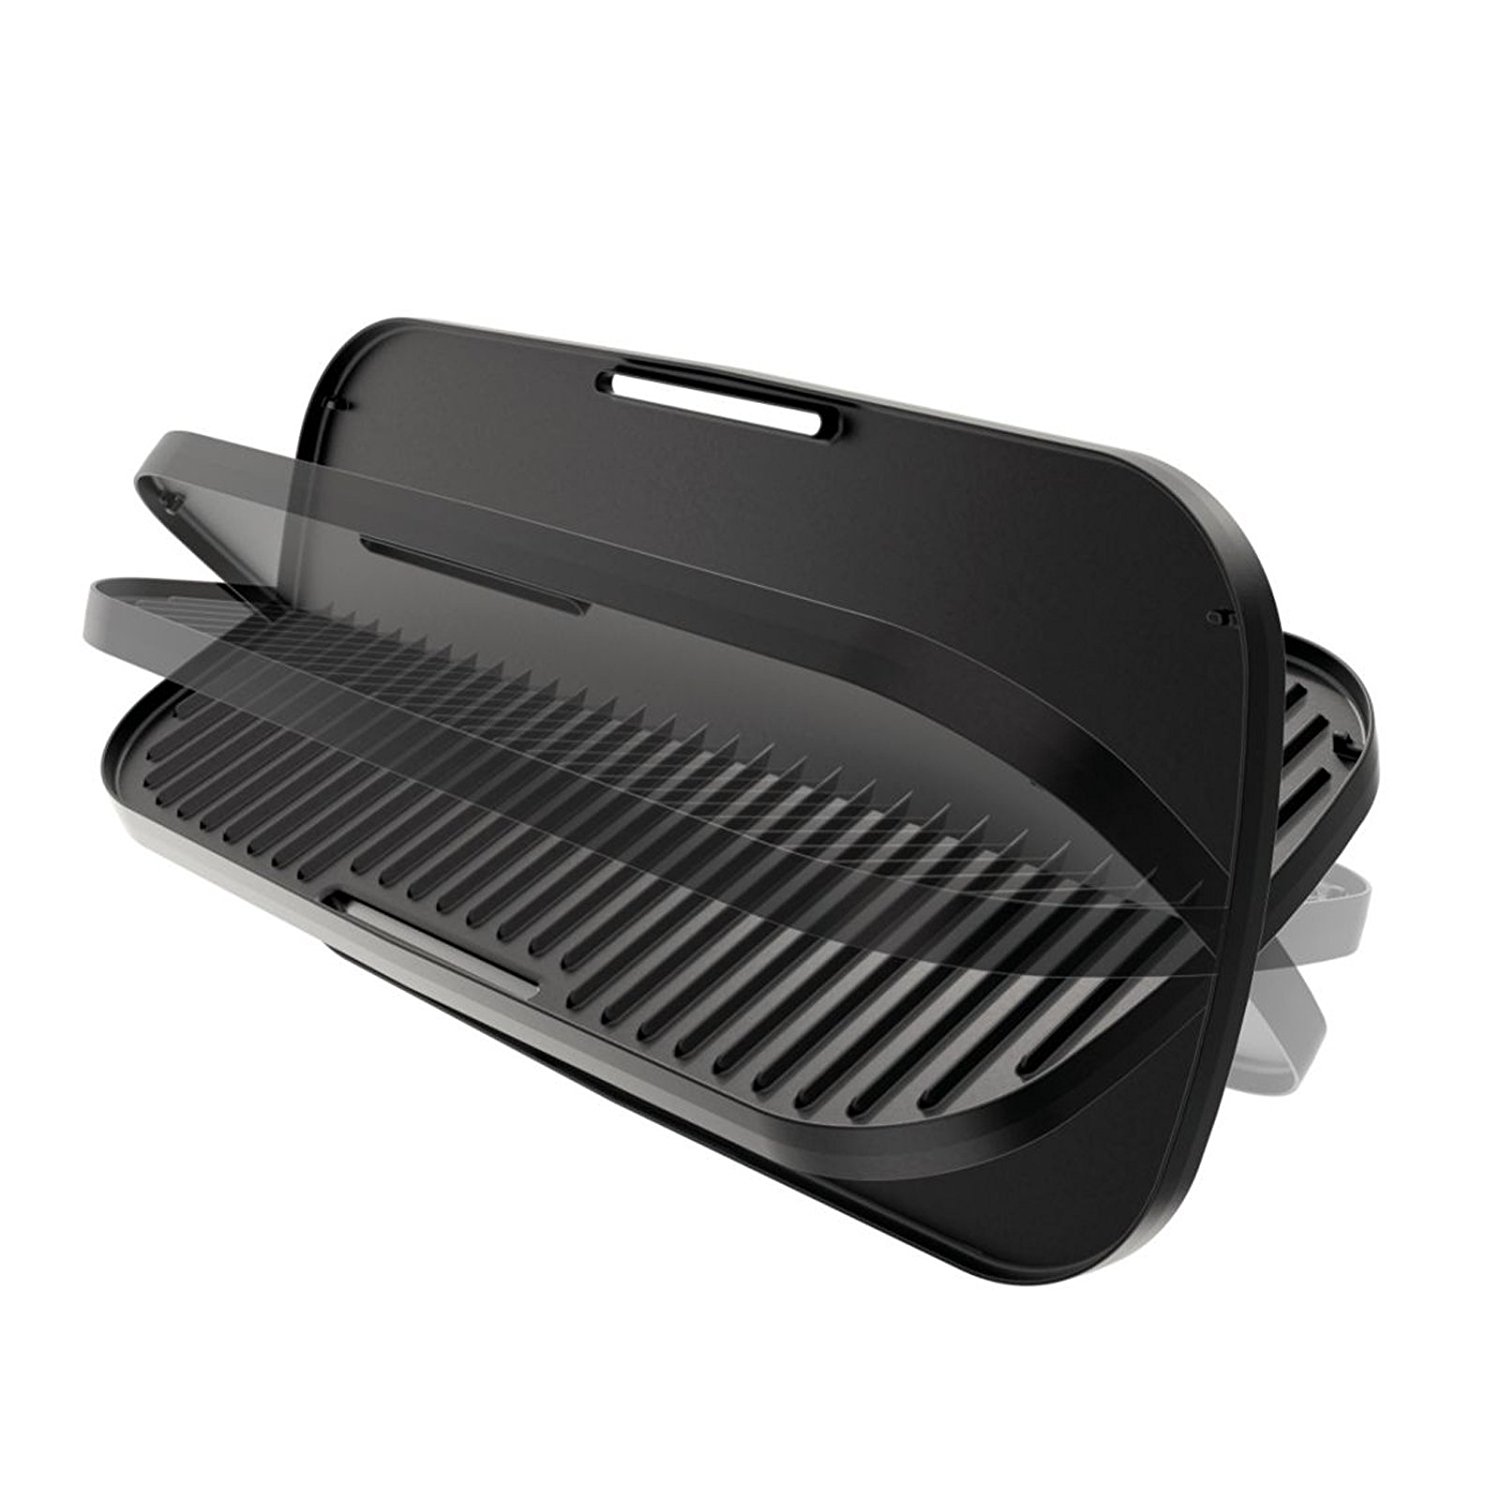 Philips HD6321 Barbecue Outdoor BBQ Indoor Electric Grill Griddle Duo